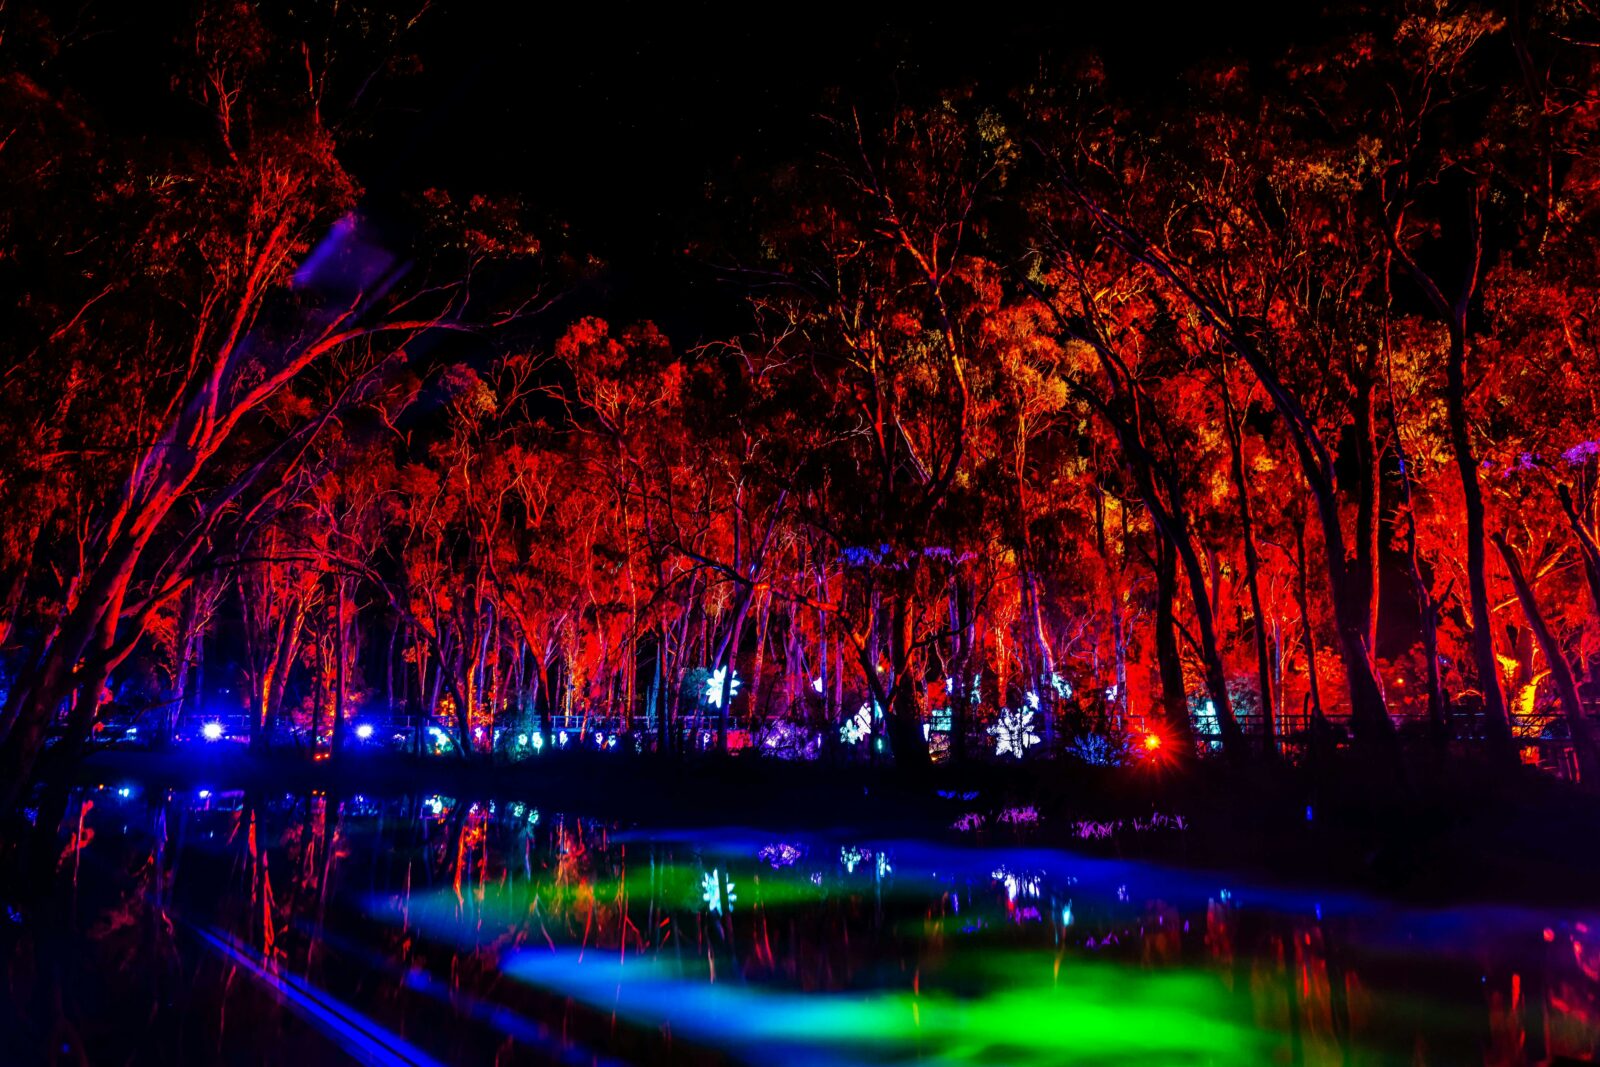 Trees lit up in red over a blue and green illuminated lagoon